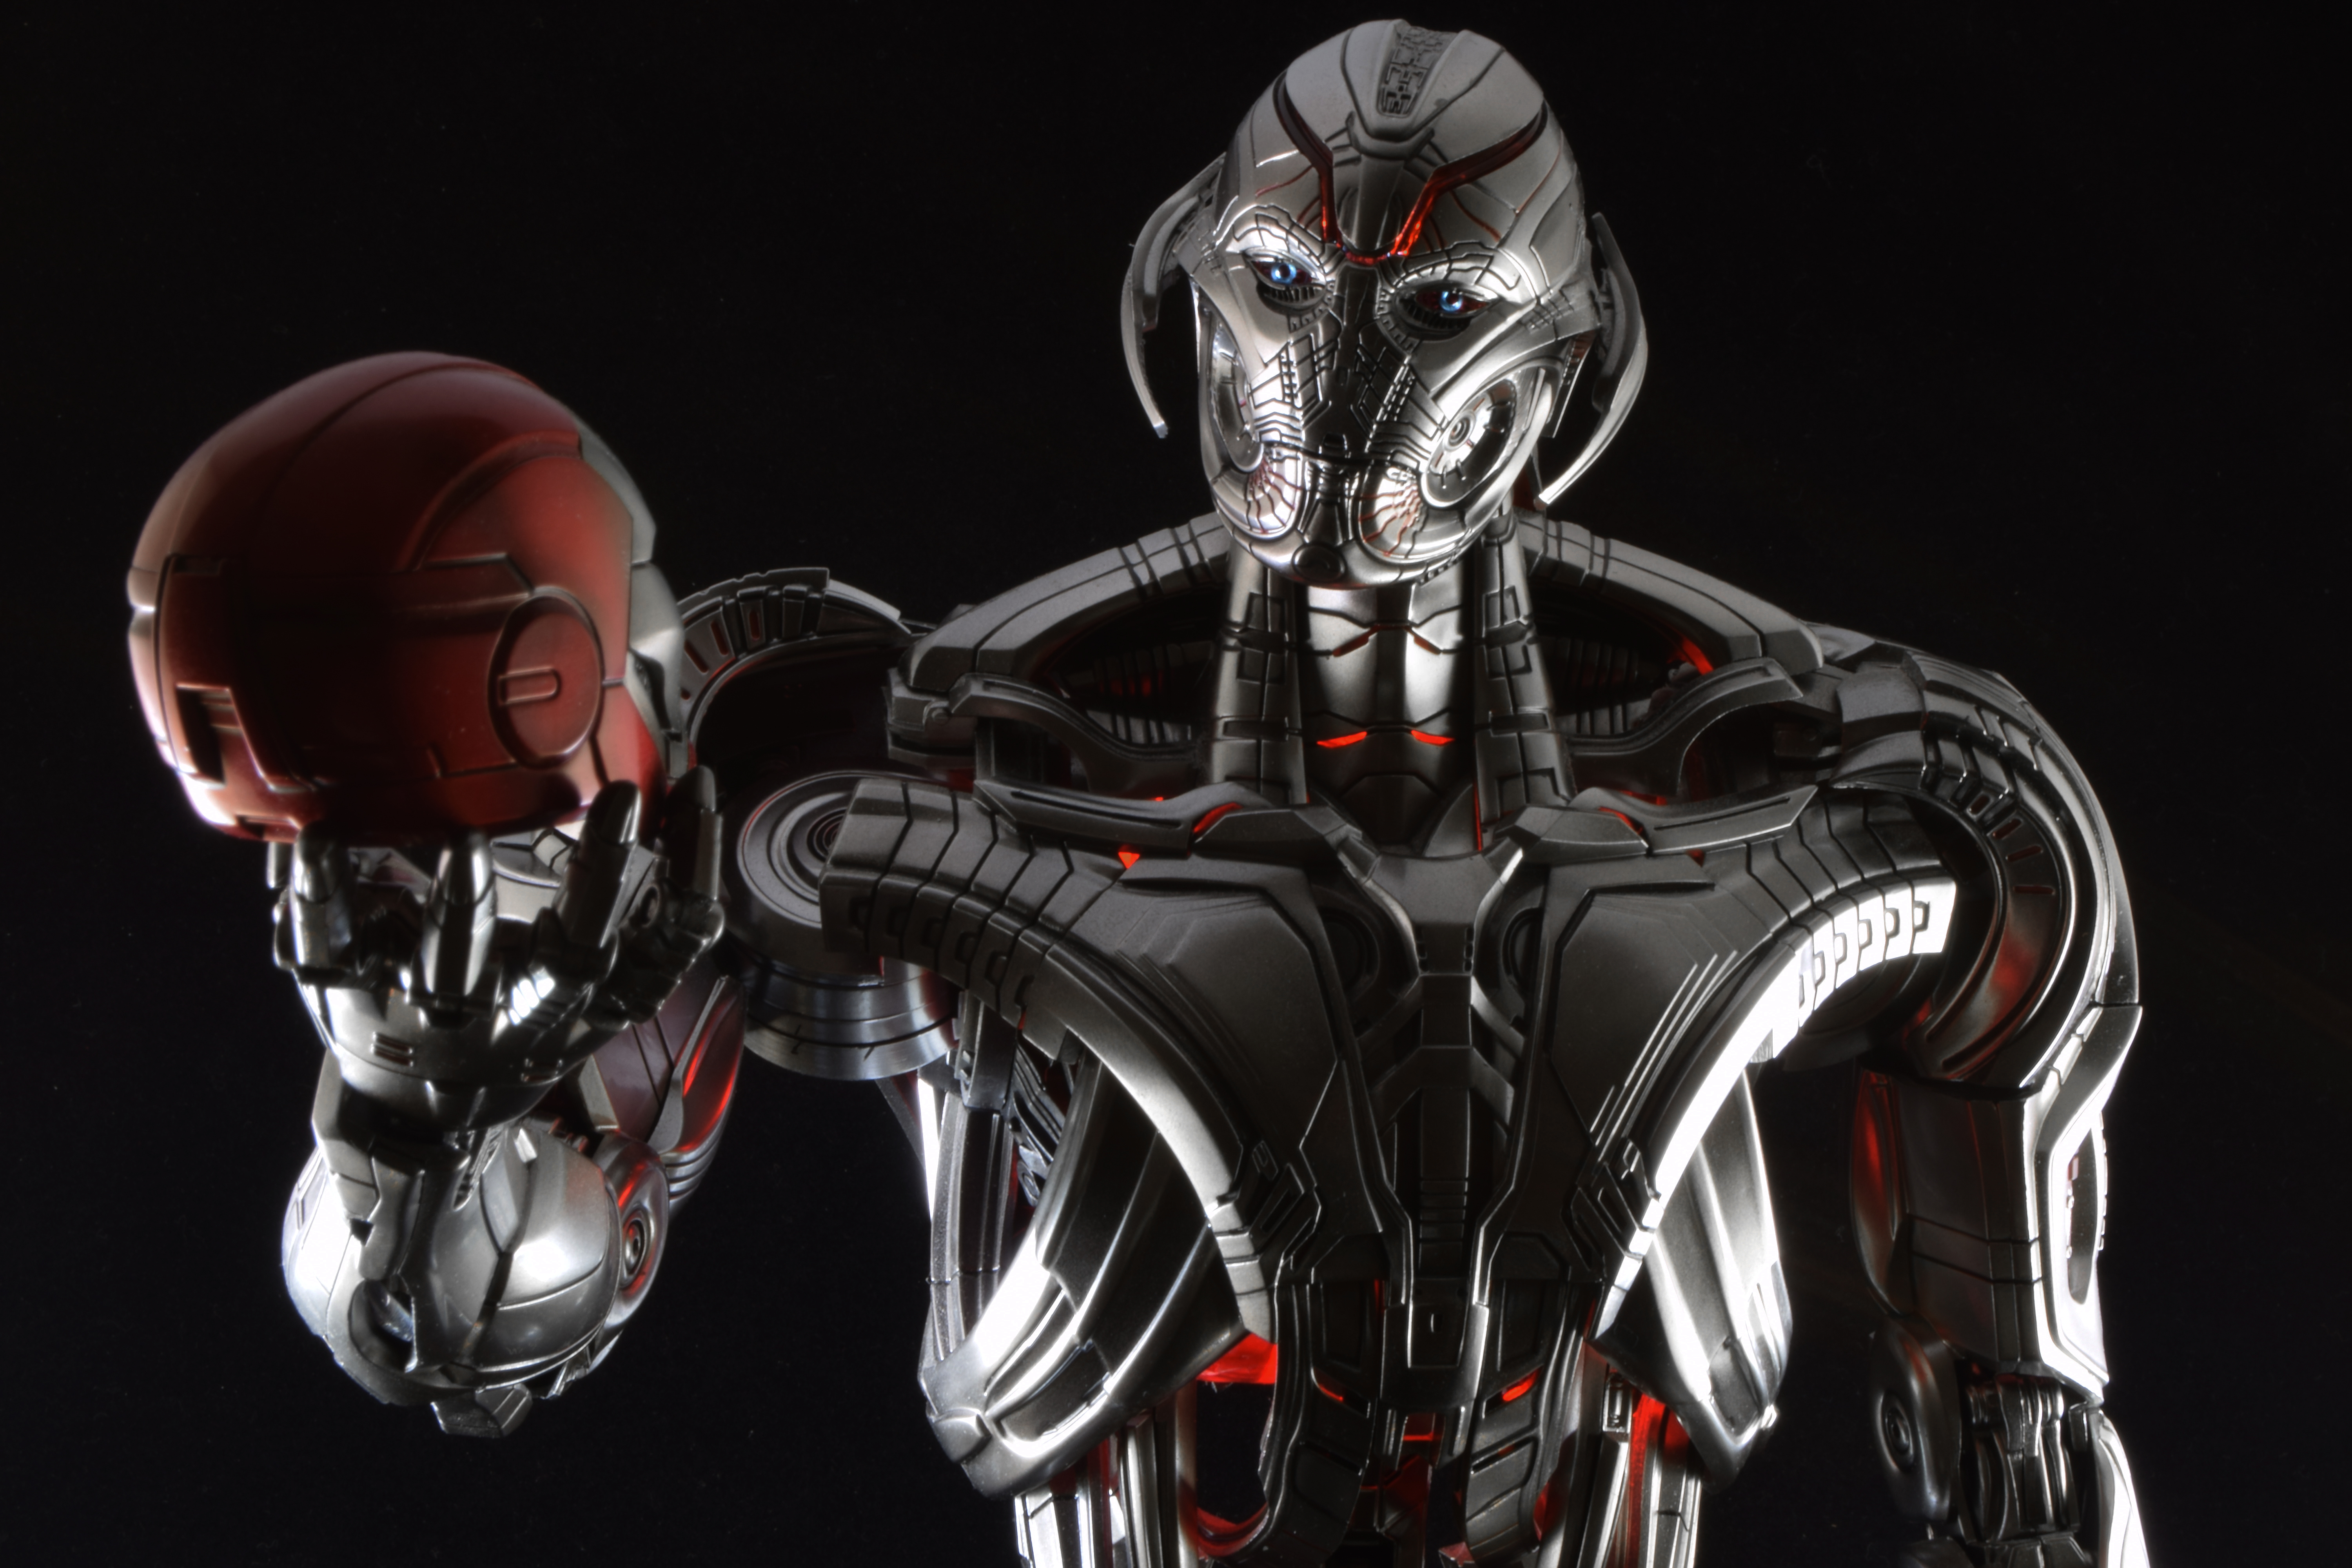 ultron, man made, toy, avengers: age of ultron, figurine